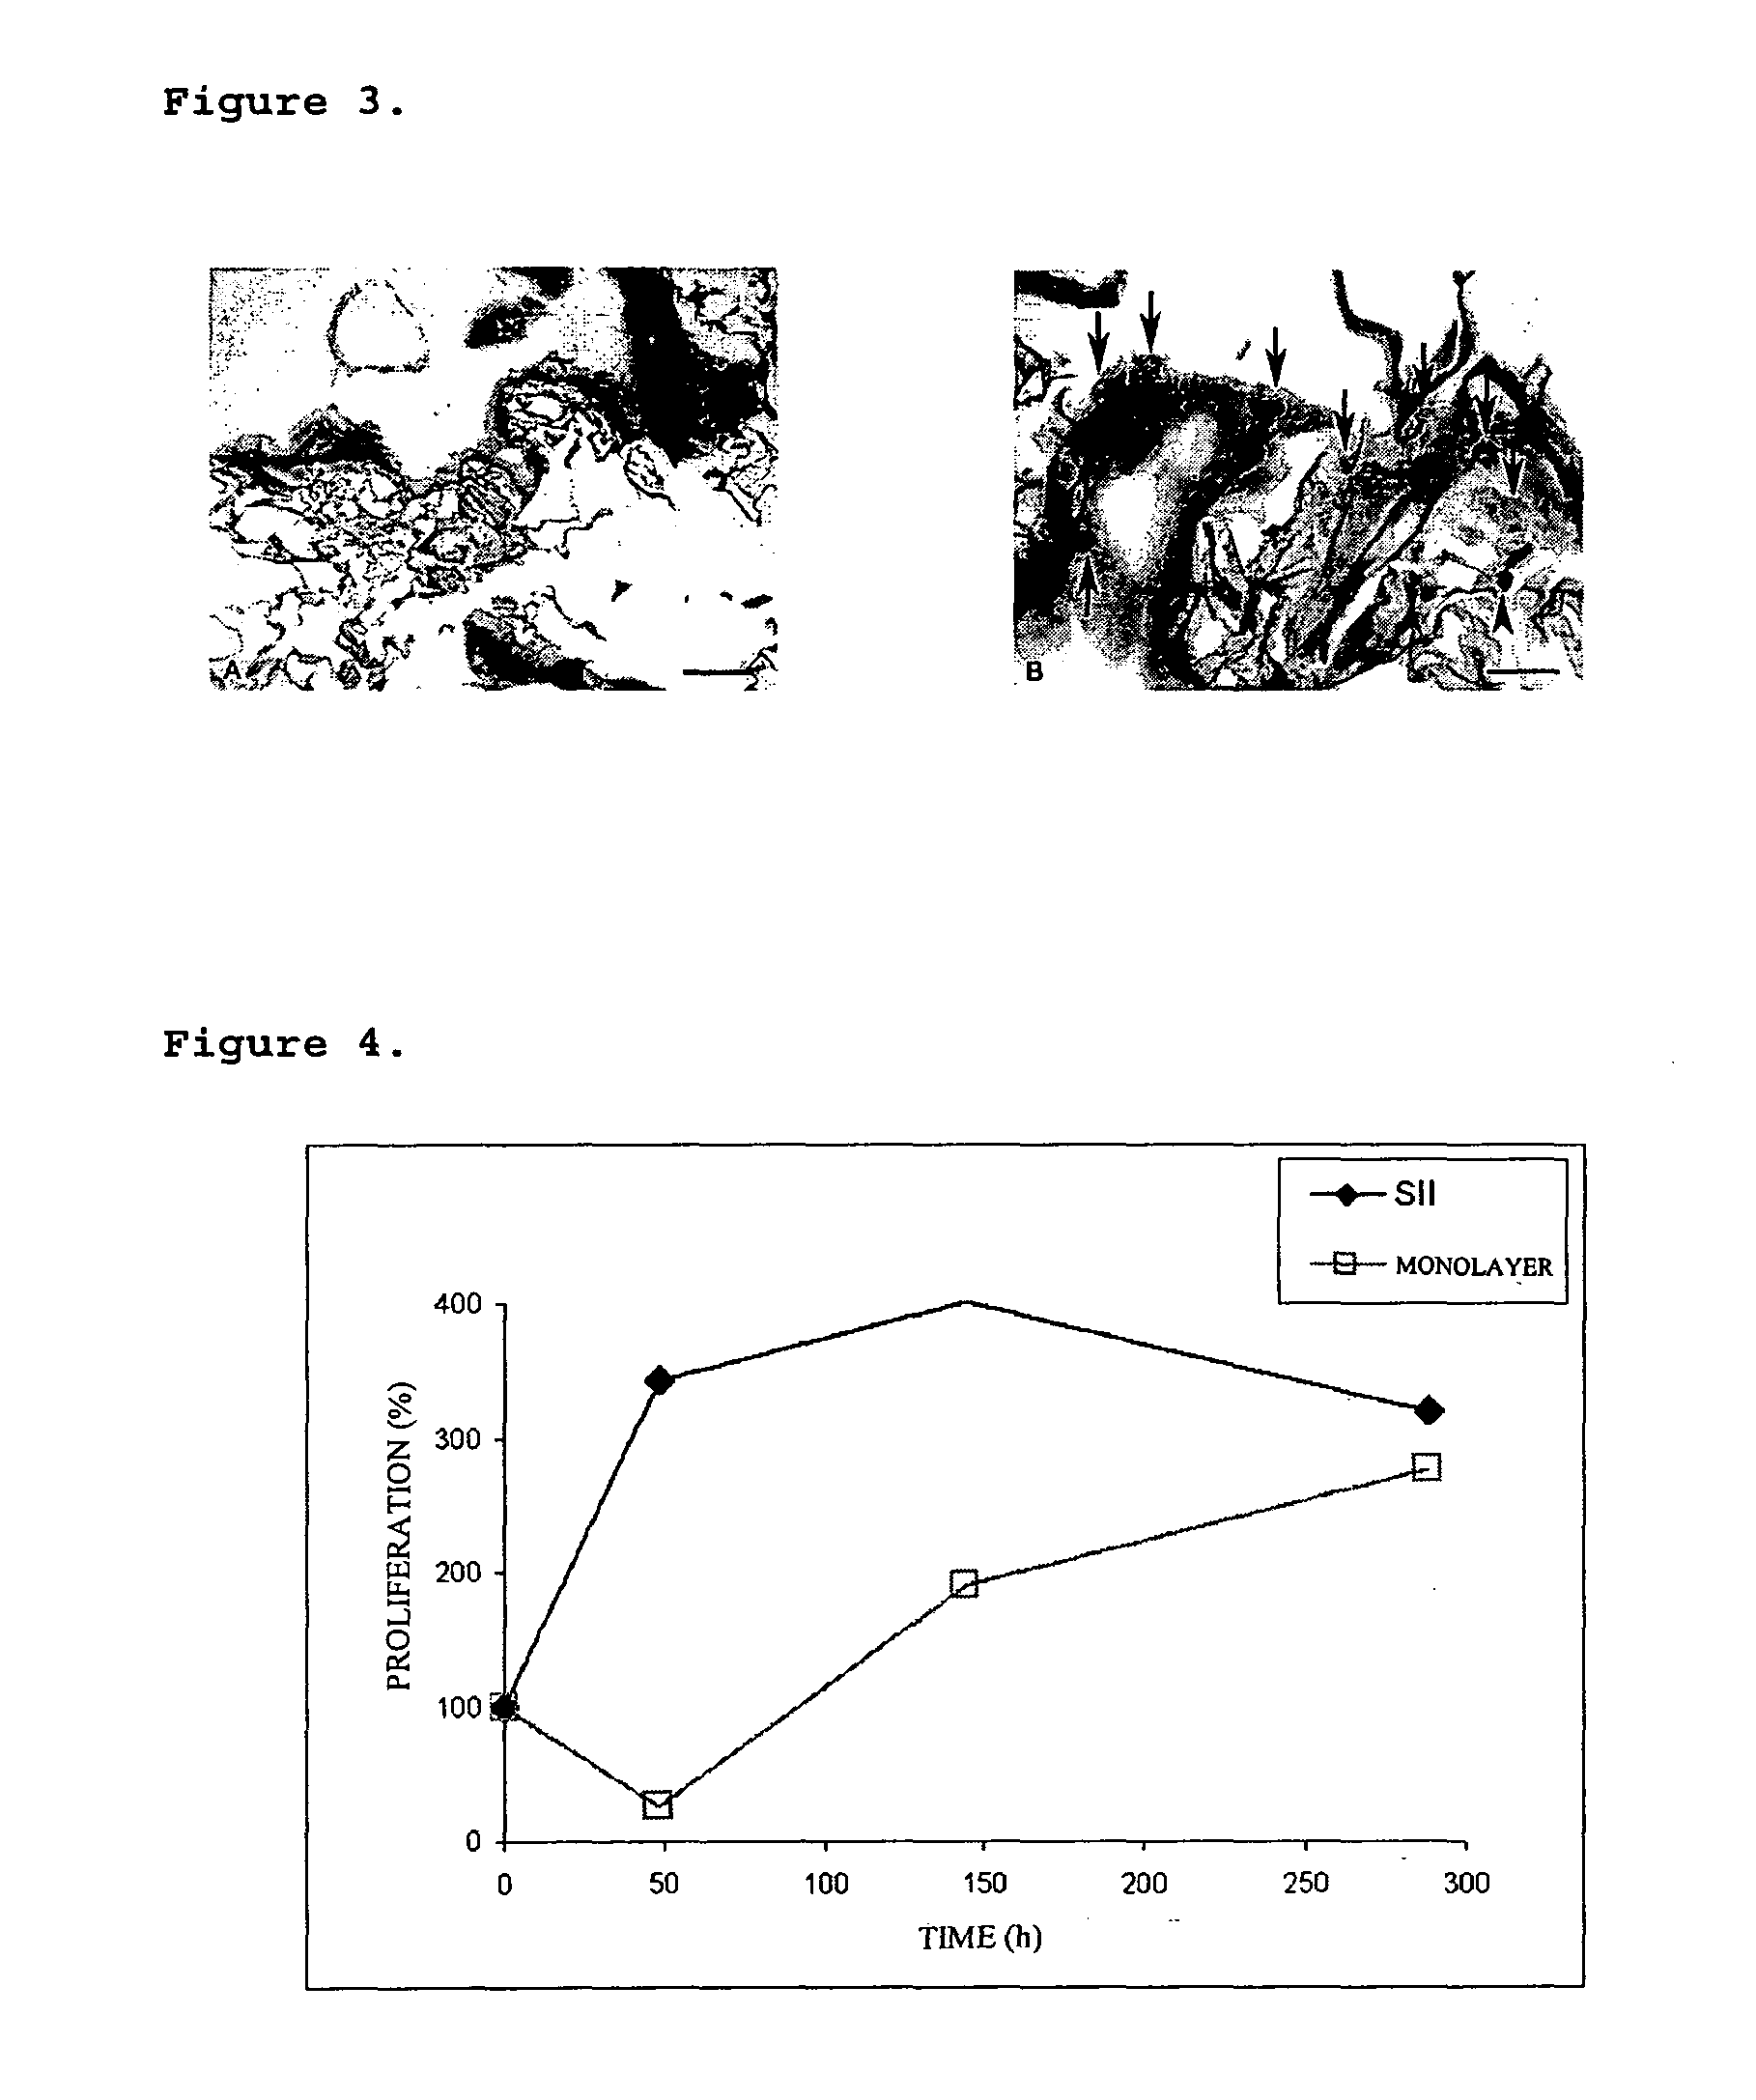 Integrated implant system (IIS) biocompatible, biodegradable and bioactive, comprising a biocompatible sterile porous polymeric matrix and a gel, integrating in situ the tridimensional matrix structure